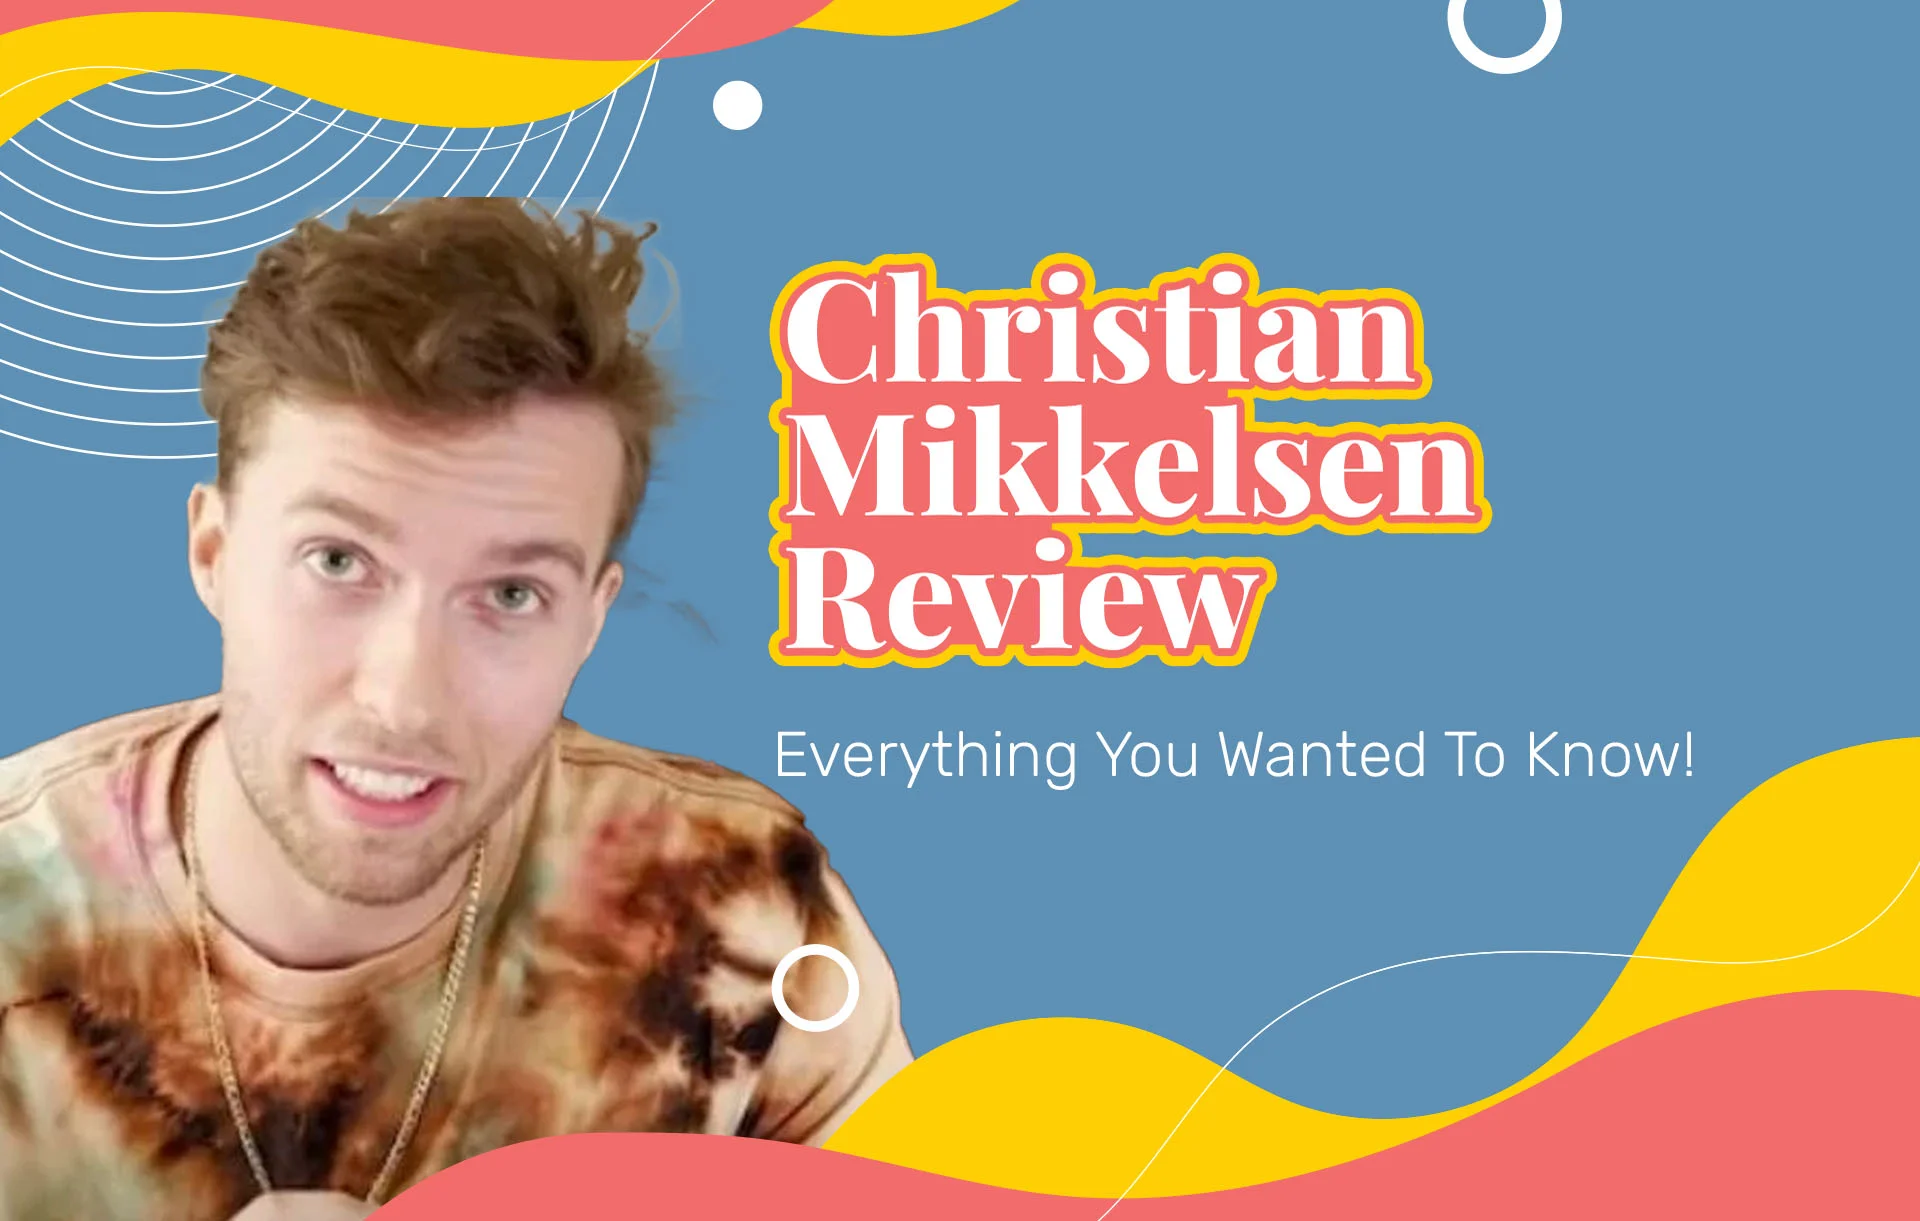 Christian Mikkelsen Reviews: Everything You Wanted To Know!